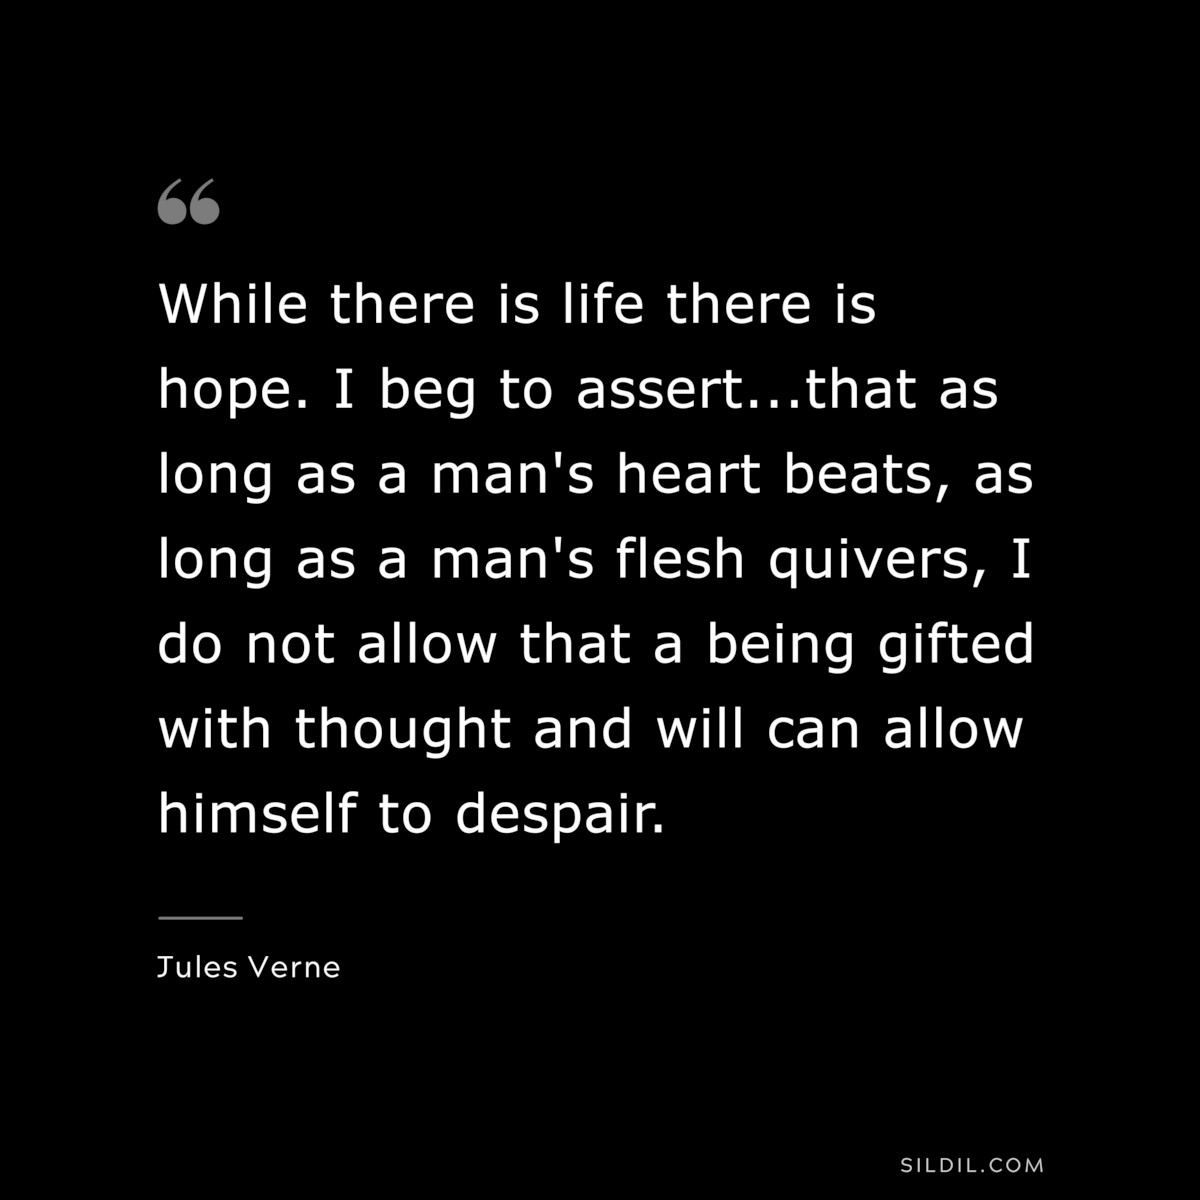 While there is life there is hope. I beg to assert...that as long as a man's heart beats, as long as a man's flesh quivers, I do not allow that a being gifted with thought and will can allow himself to despair.